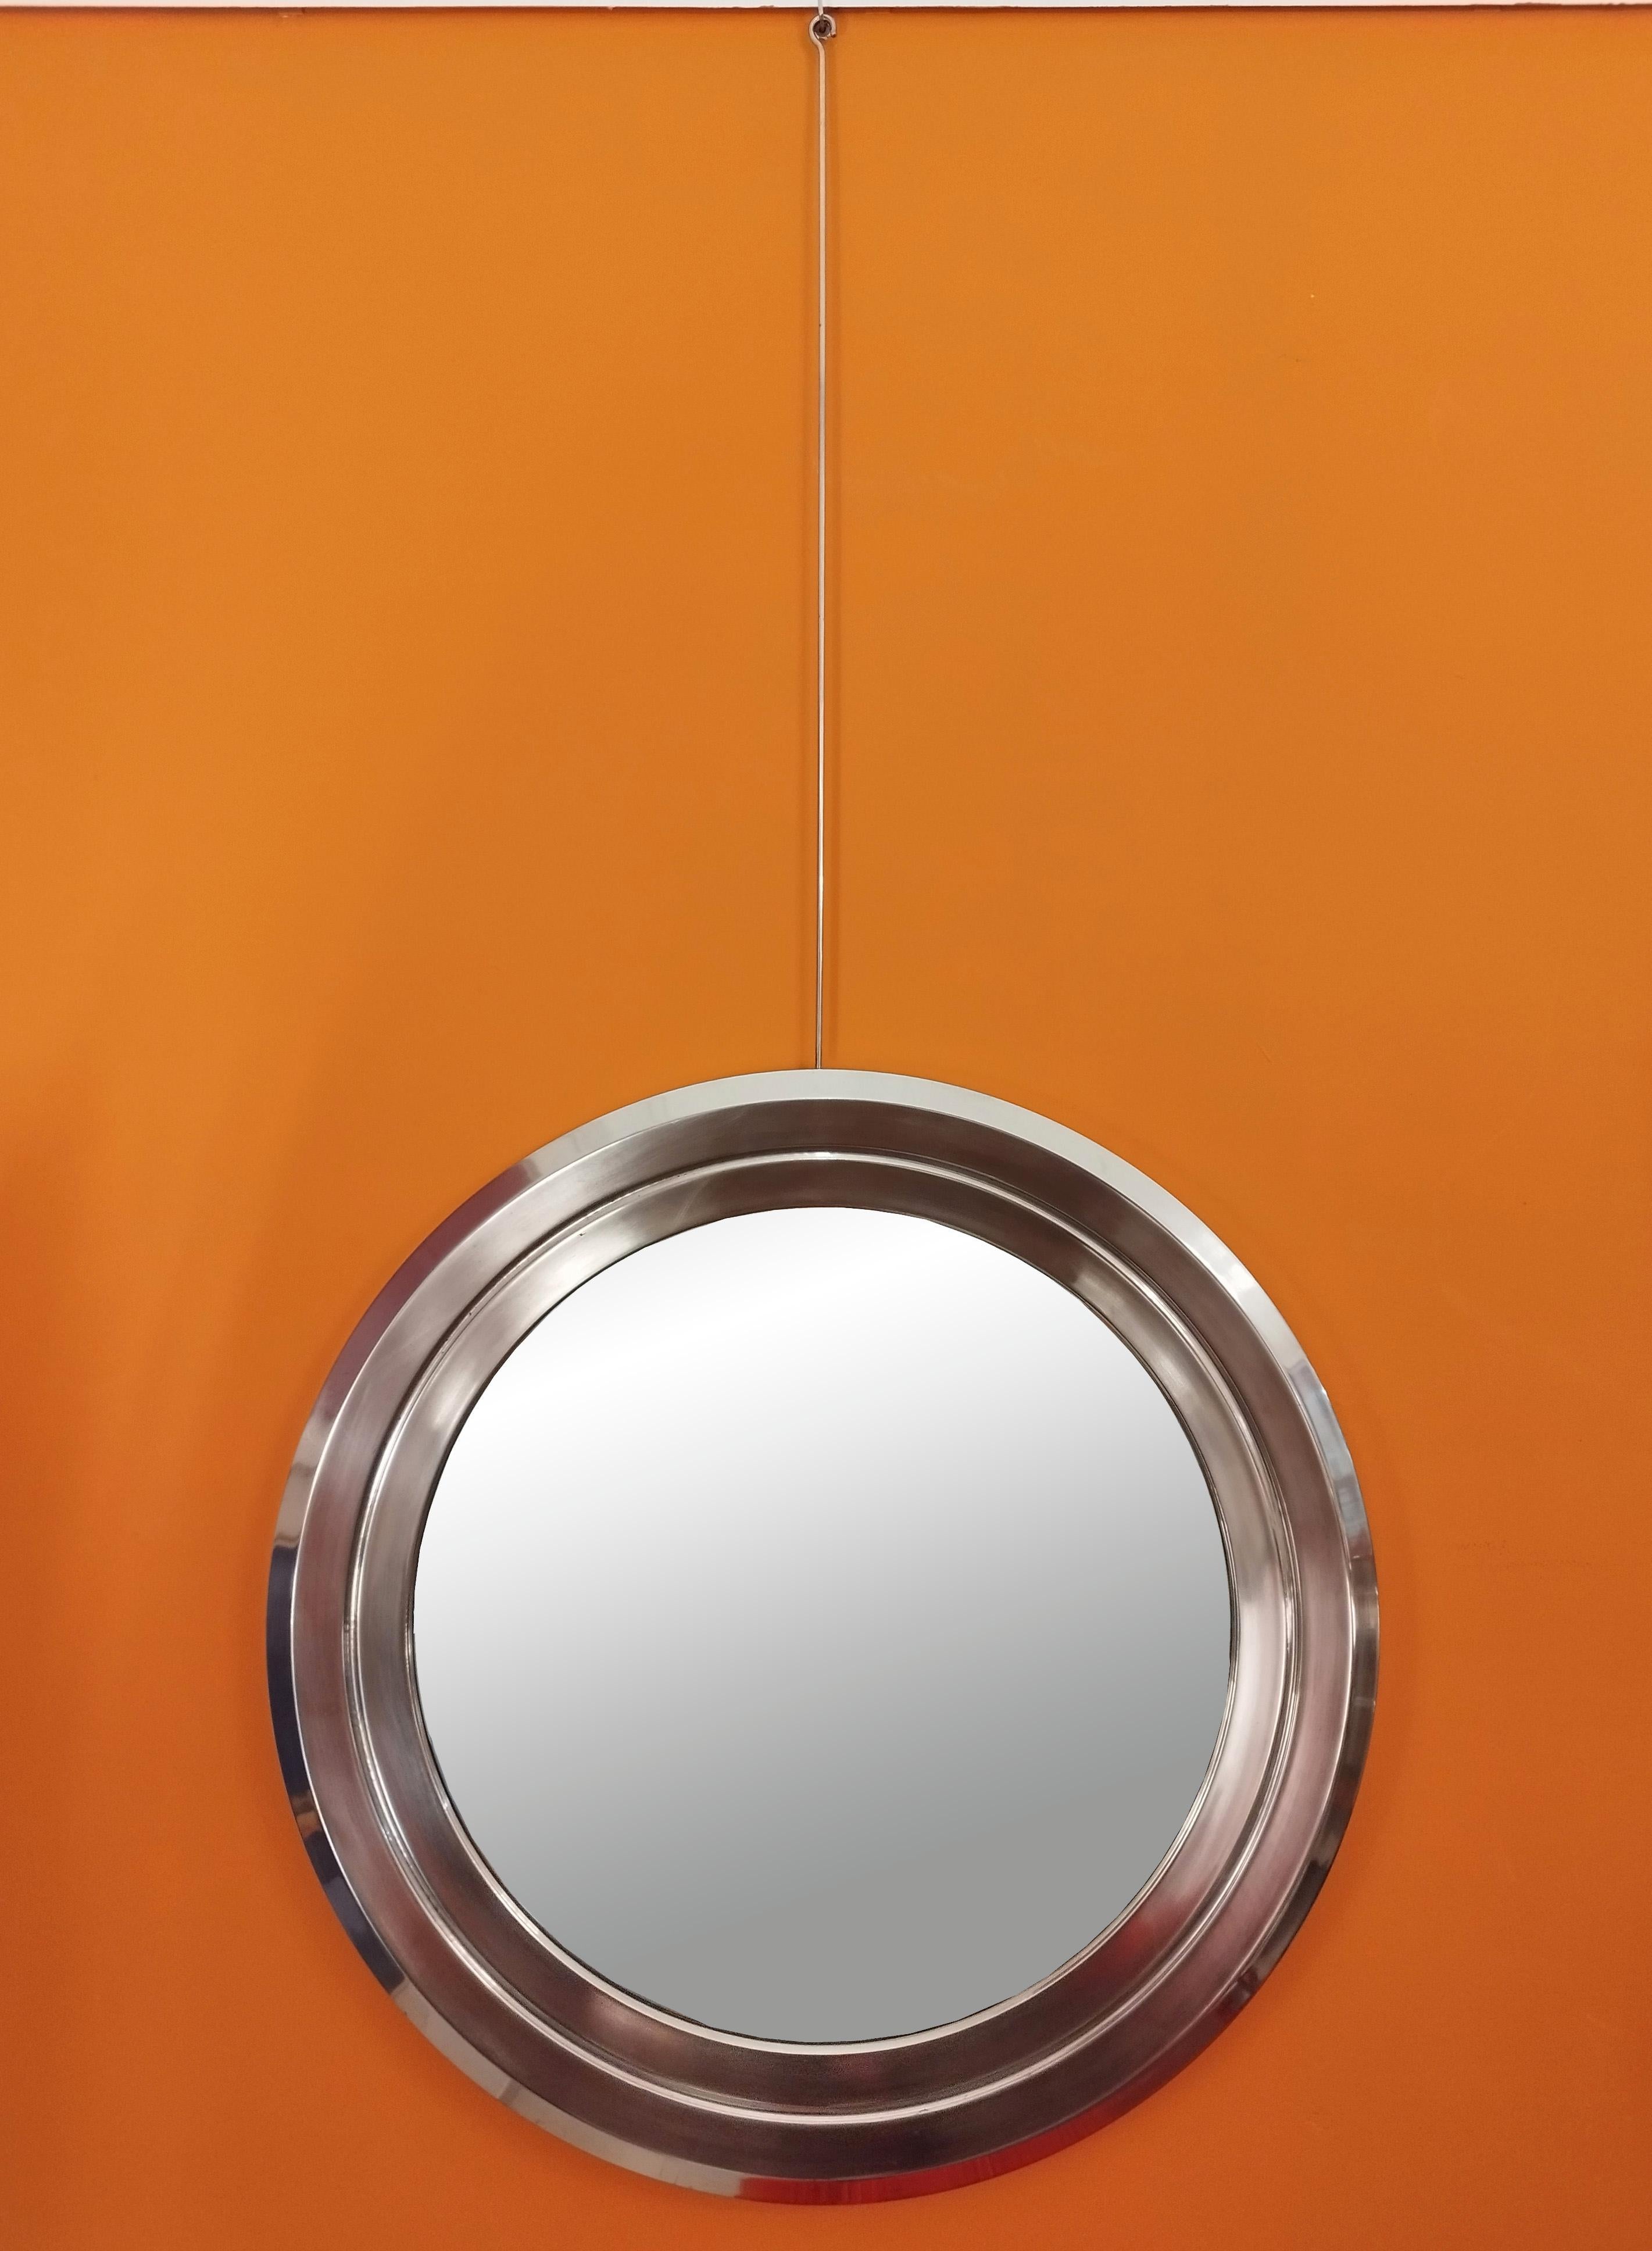 Circular wall mirror with brushed aluminum frame and black painted metal back panel and tubular steel Ddesigned by Segio Mazza in the 1960s.
The state of preservation is excellent as the original patina has given value and depth to this object.